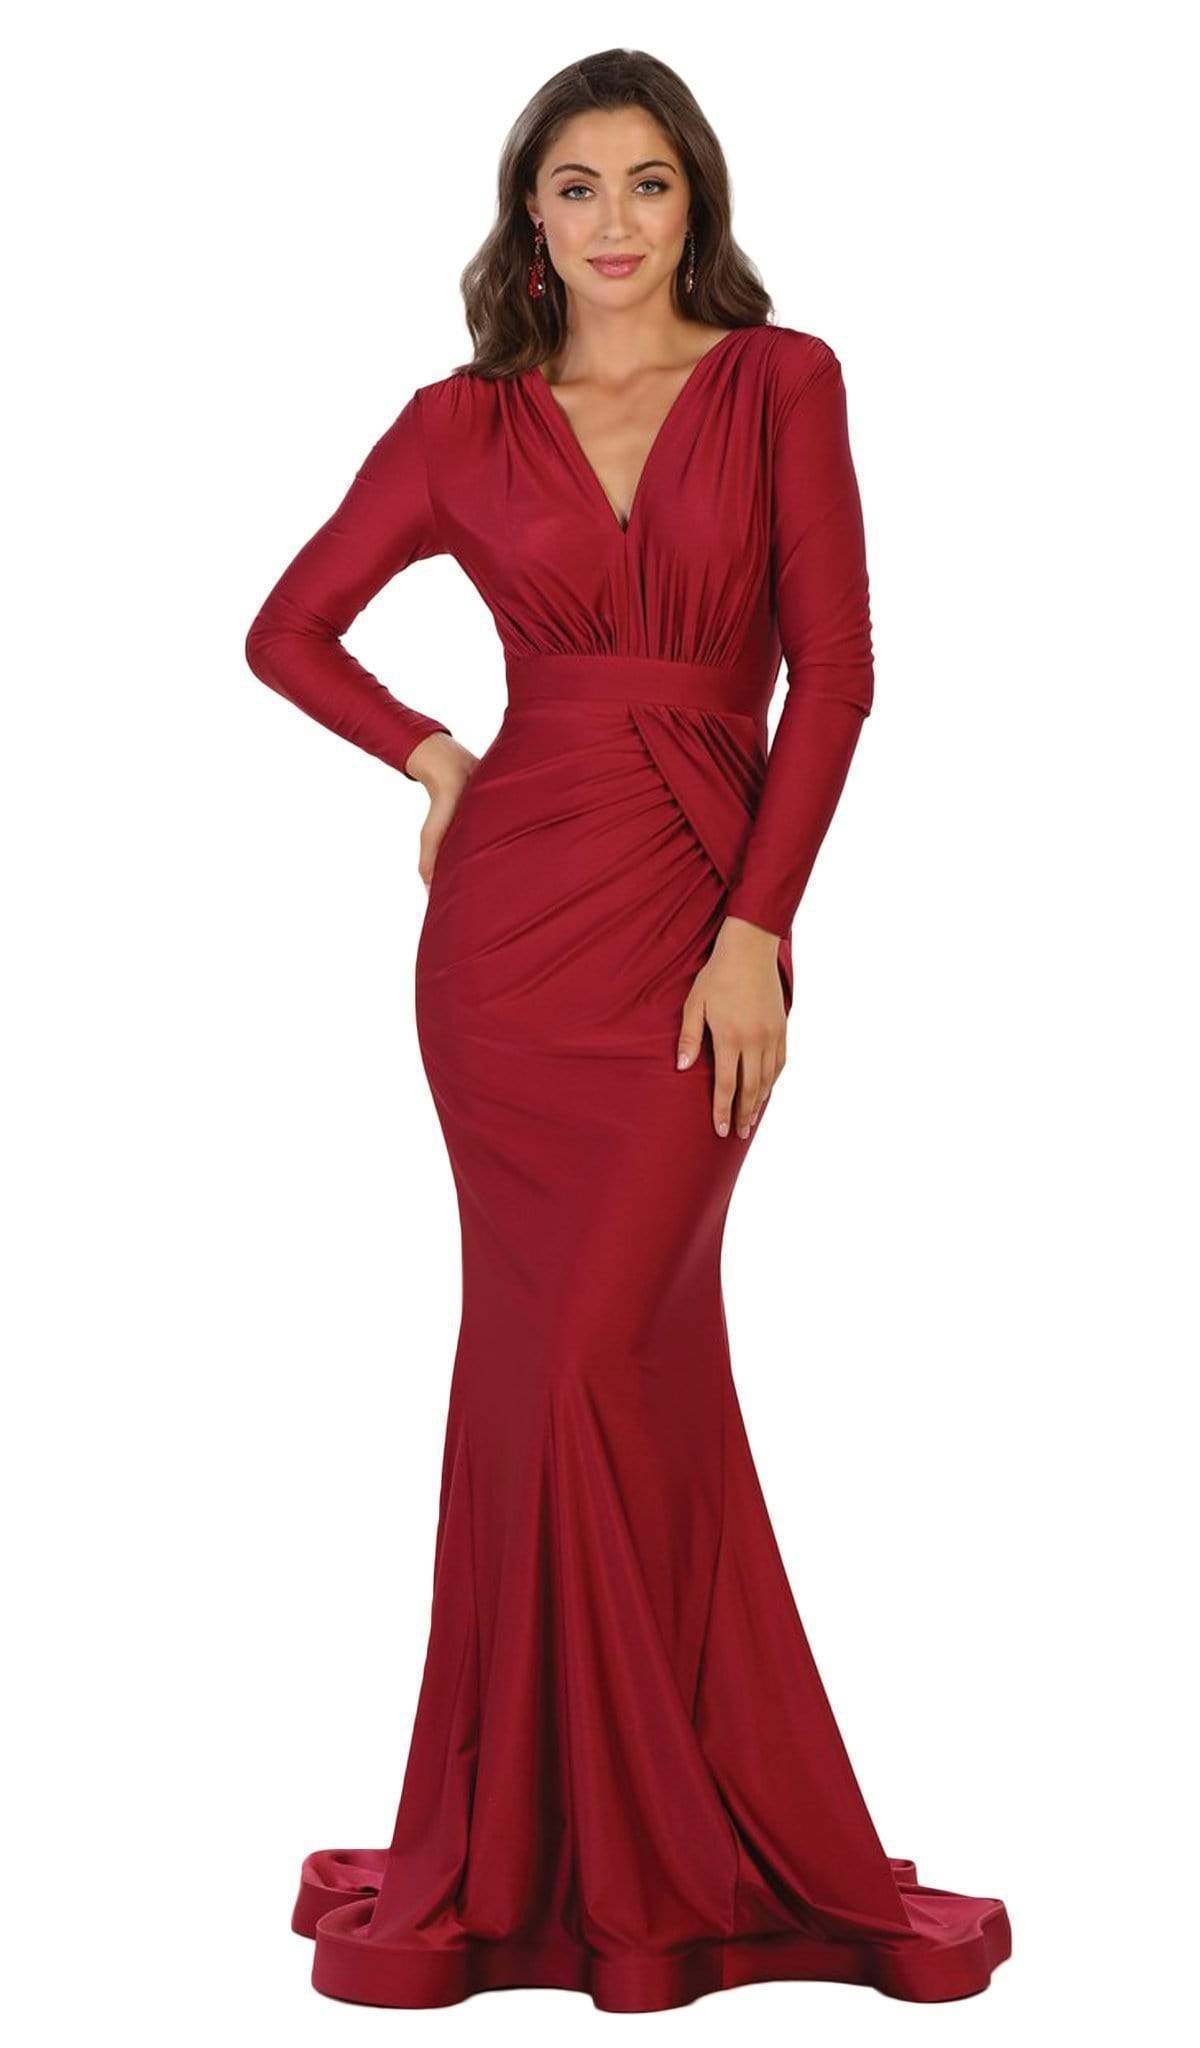 May Queen - Ruched Deep V-neck Sheath Evening Dress MQ1530